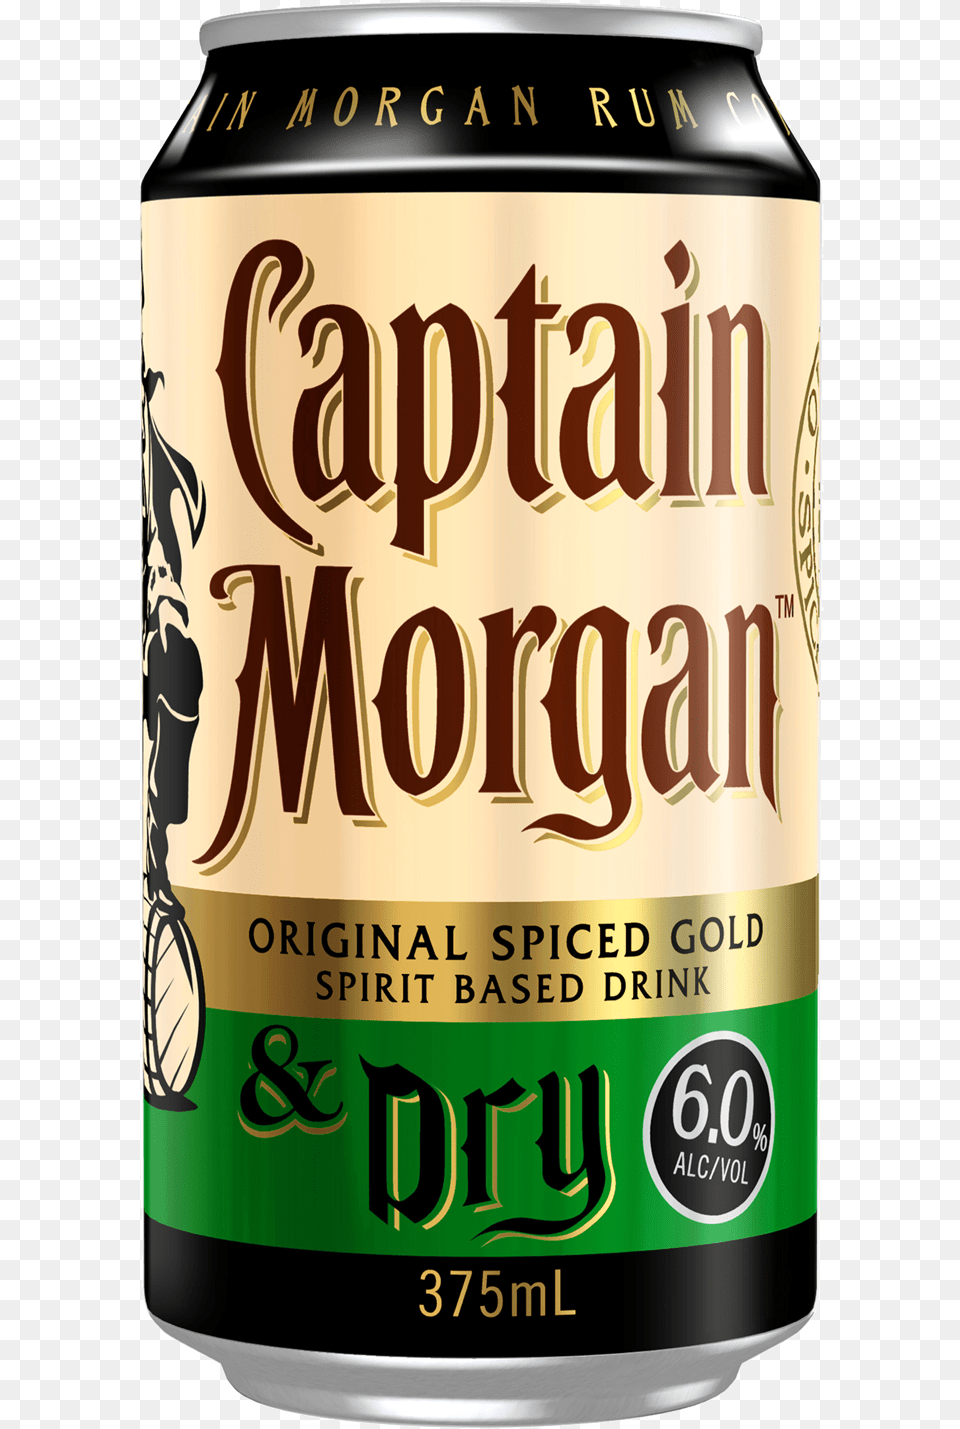 Captain Morgan Original Spiced Gold Amp Dry Cans 375ml Captain Morgan Original Spiced Gold Amp Cola Cans, Alcohol, Beer, Beverage, Can Png Image